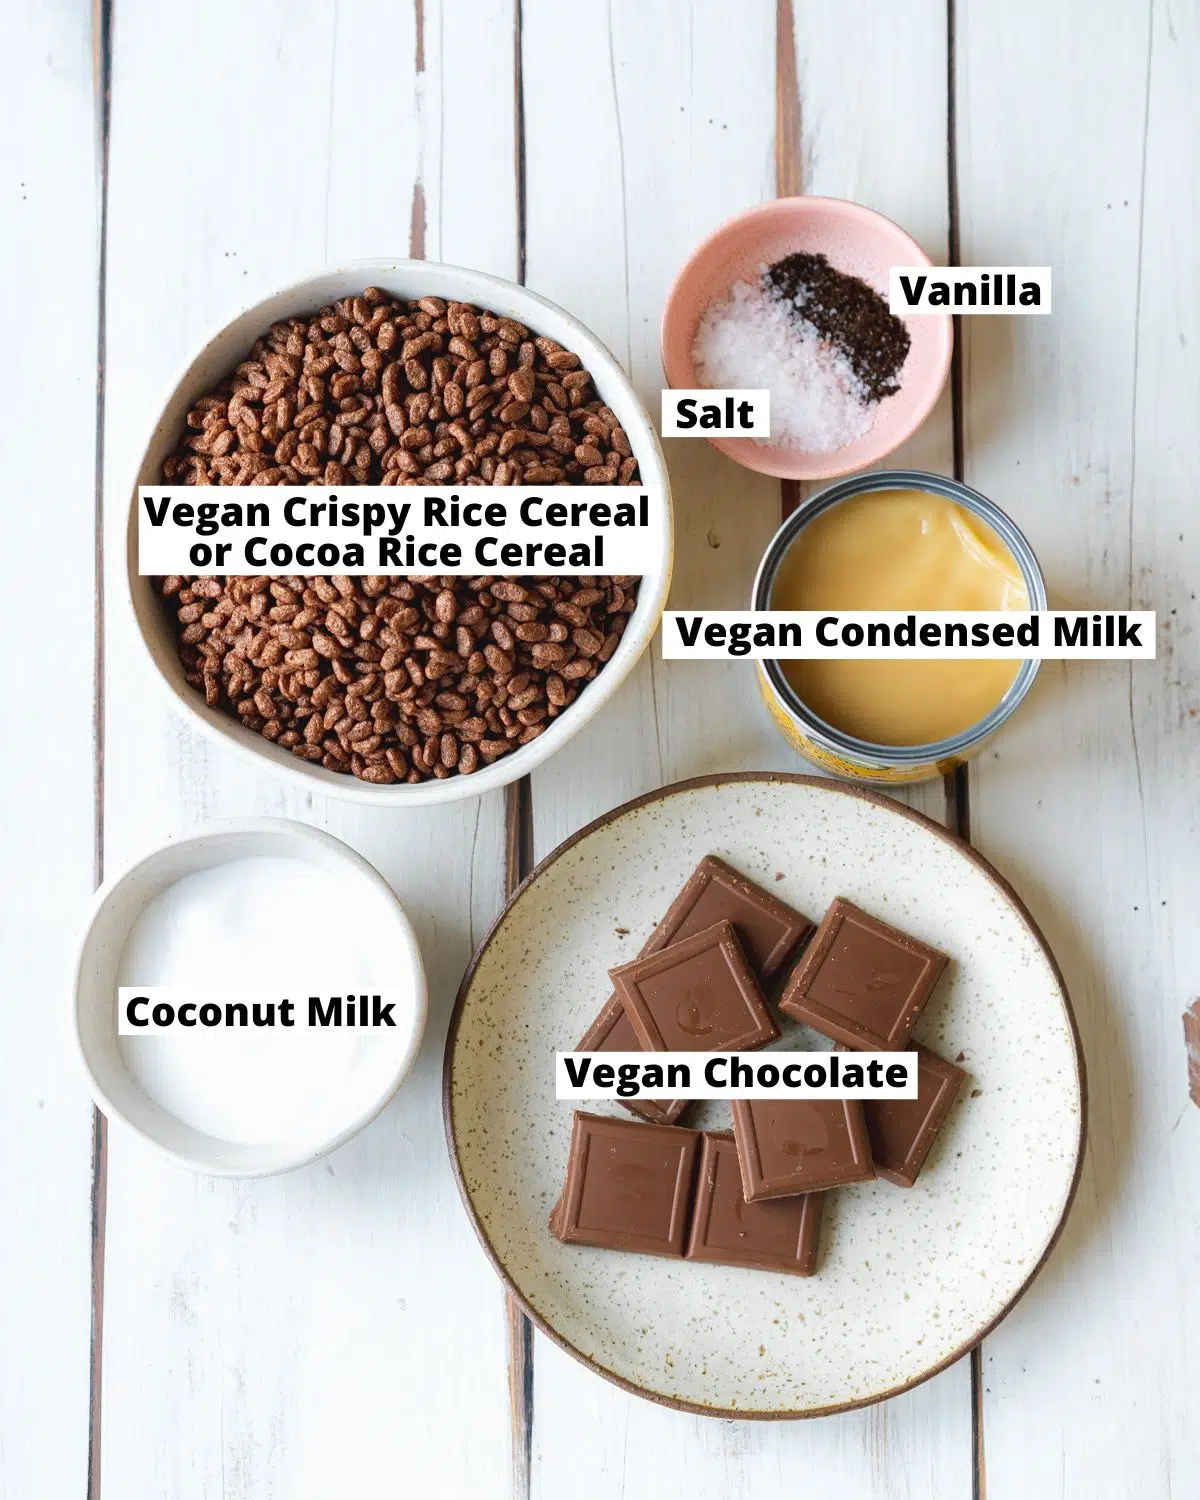 ingredients for homemade toffee crisps measured out in bowls.